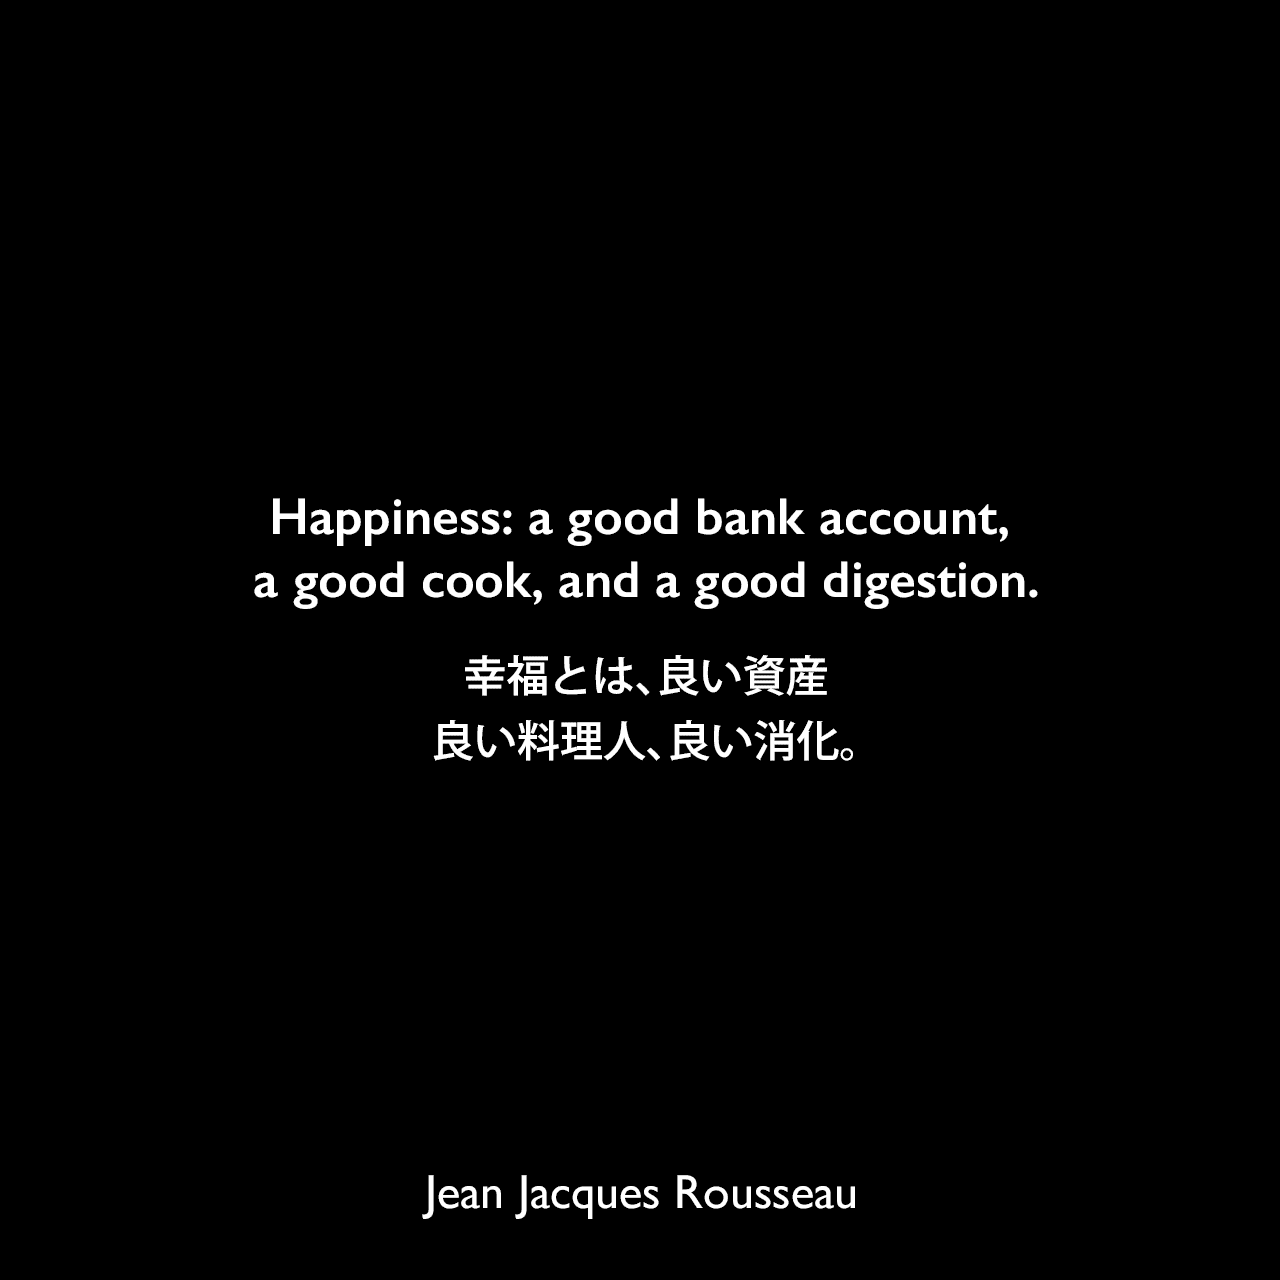 Happiness: a good bank account, a good cook, and a good digestion.幸福とは、良い資産、良い料理人、良い消化。Jean Jacques Rousseau